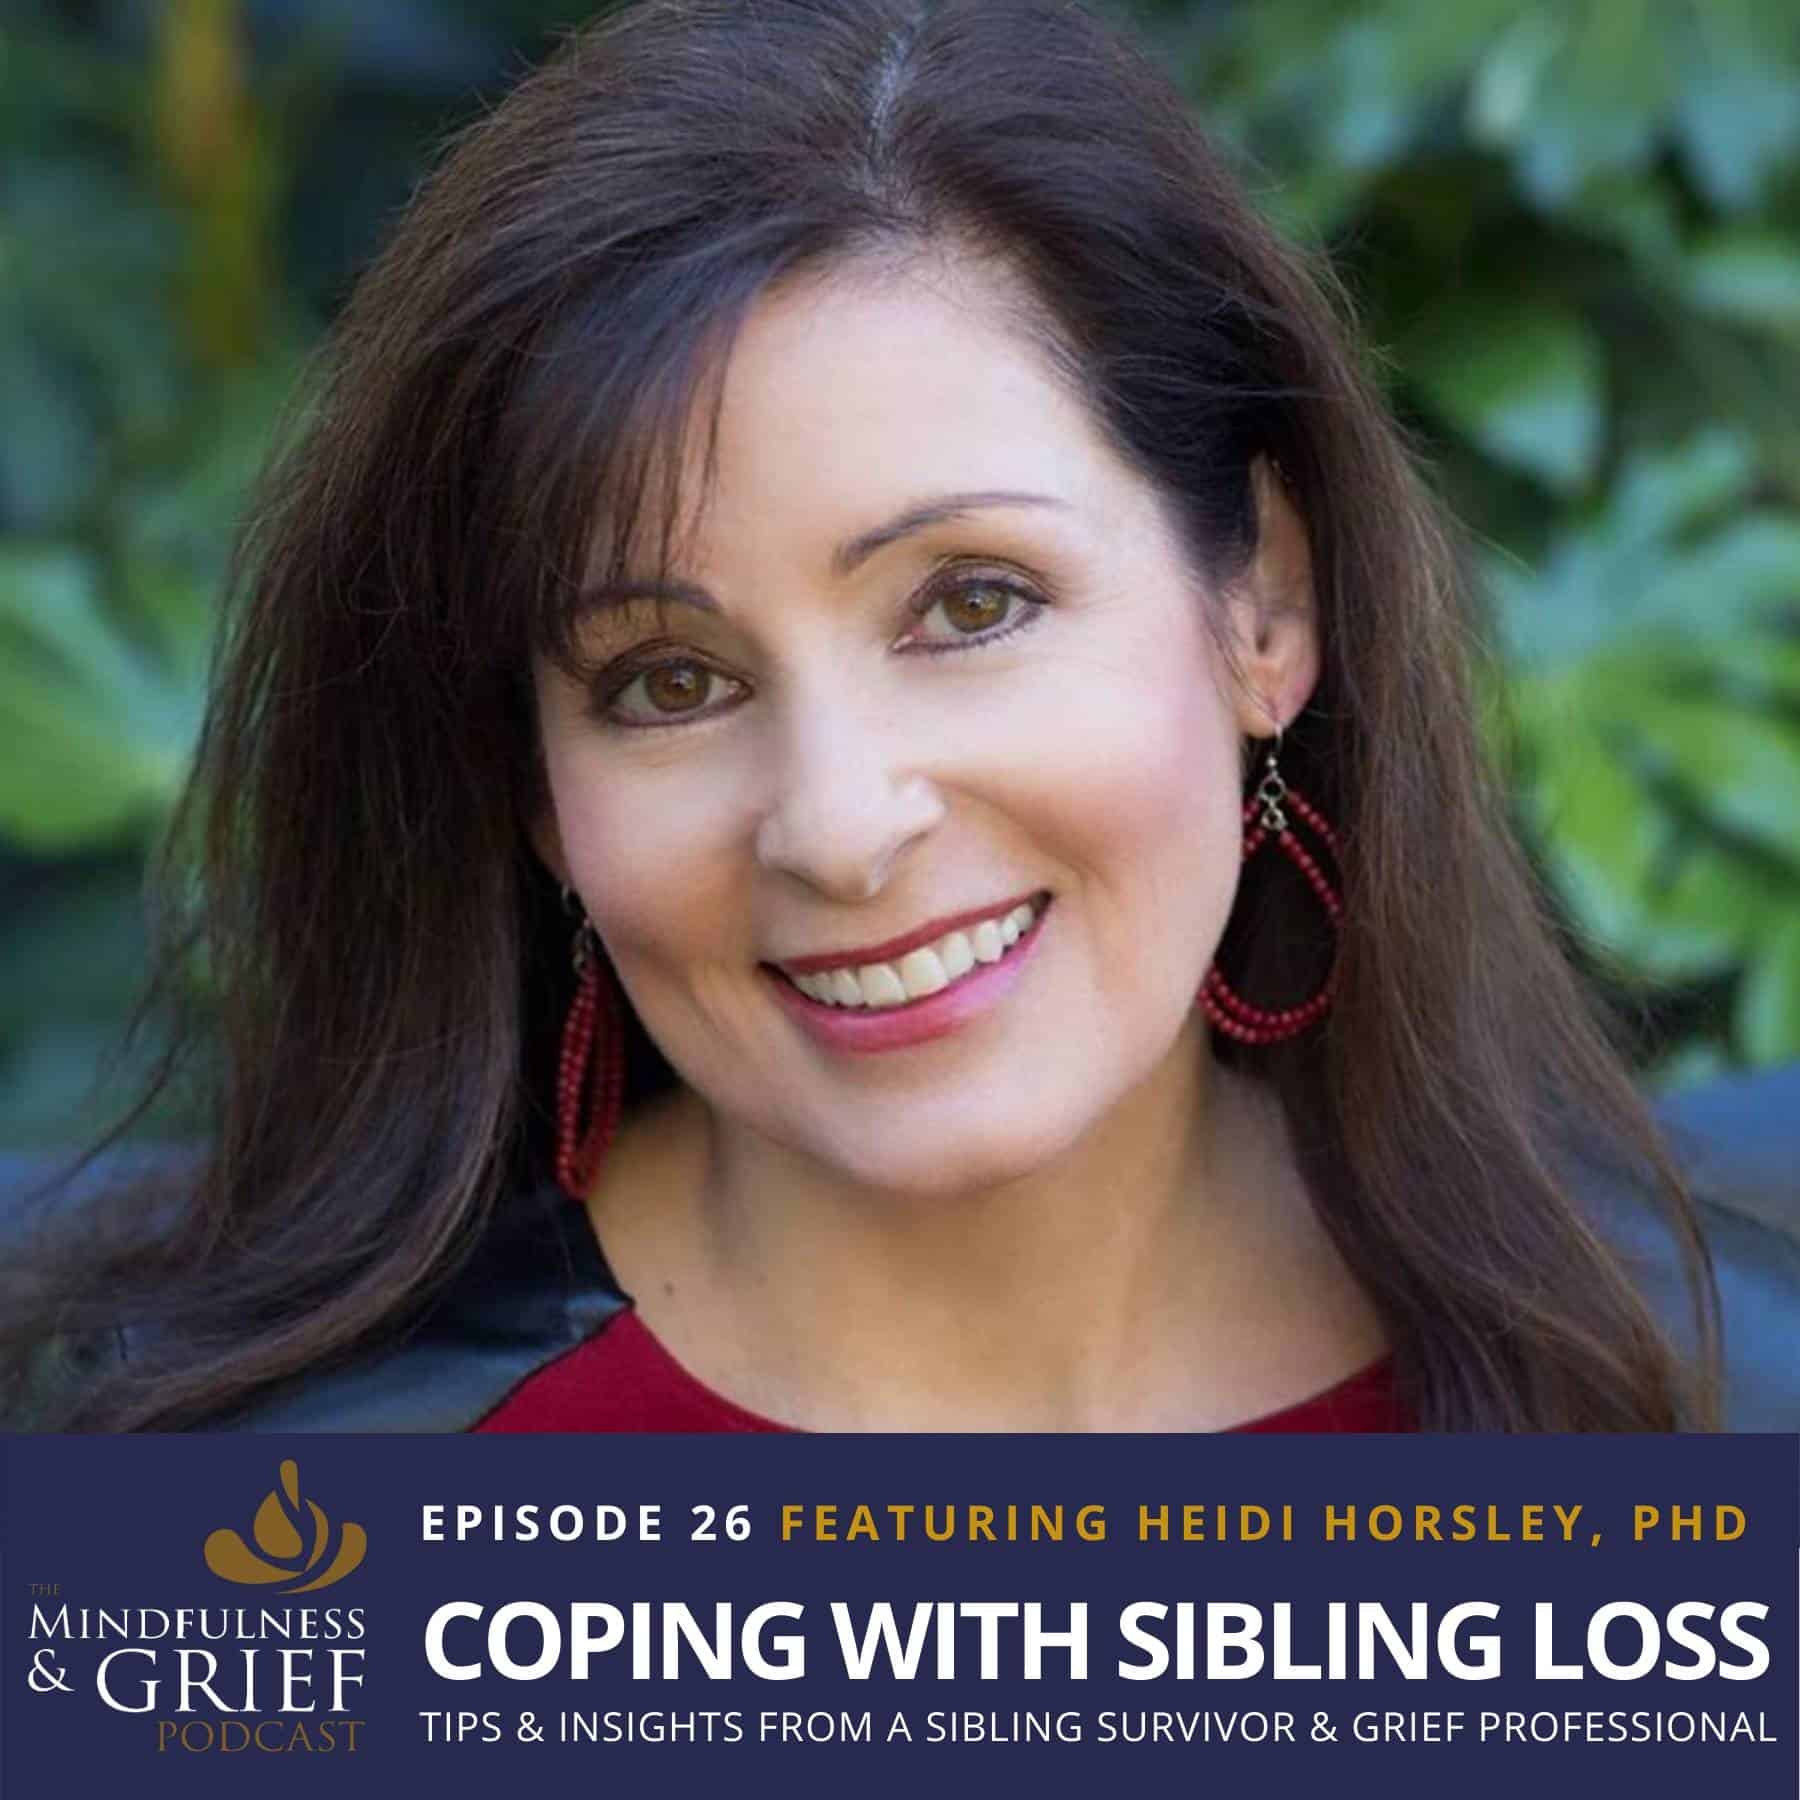 Coping with sibling loss tips and insights